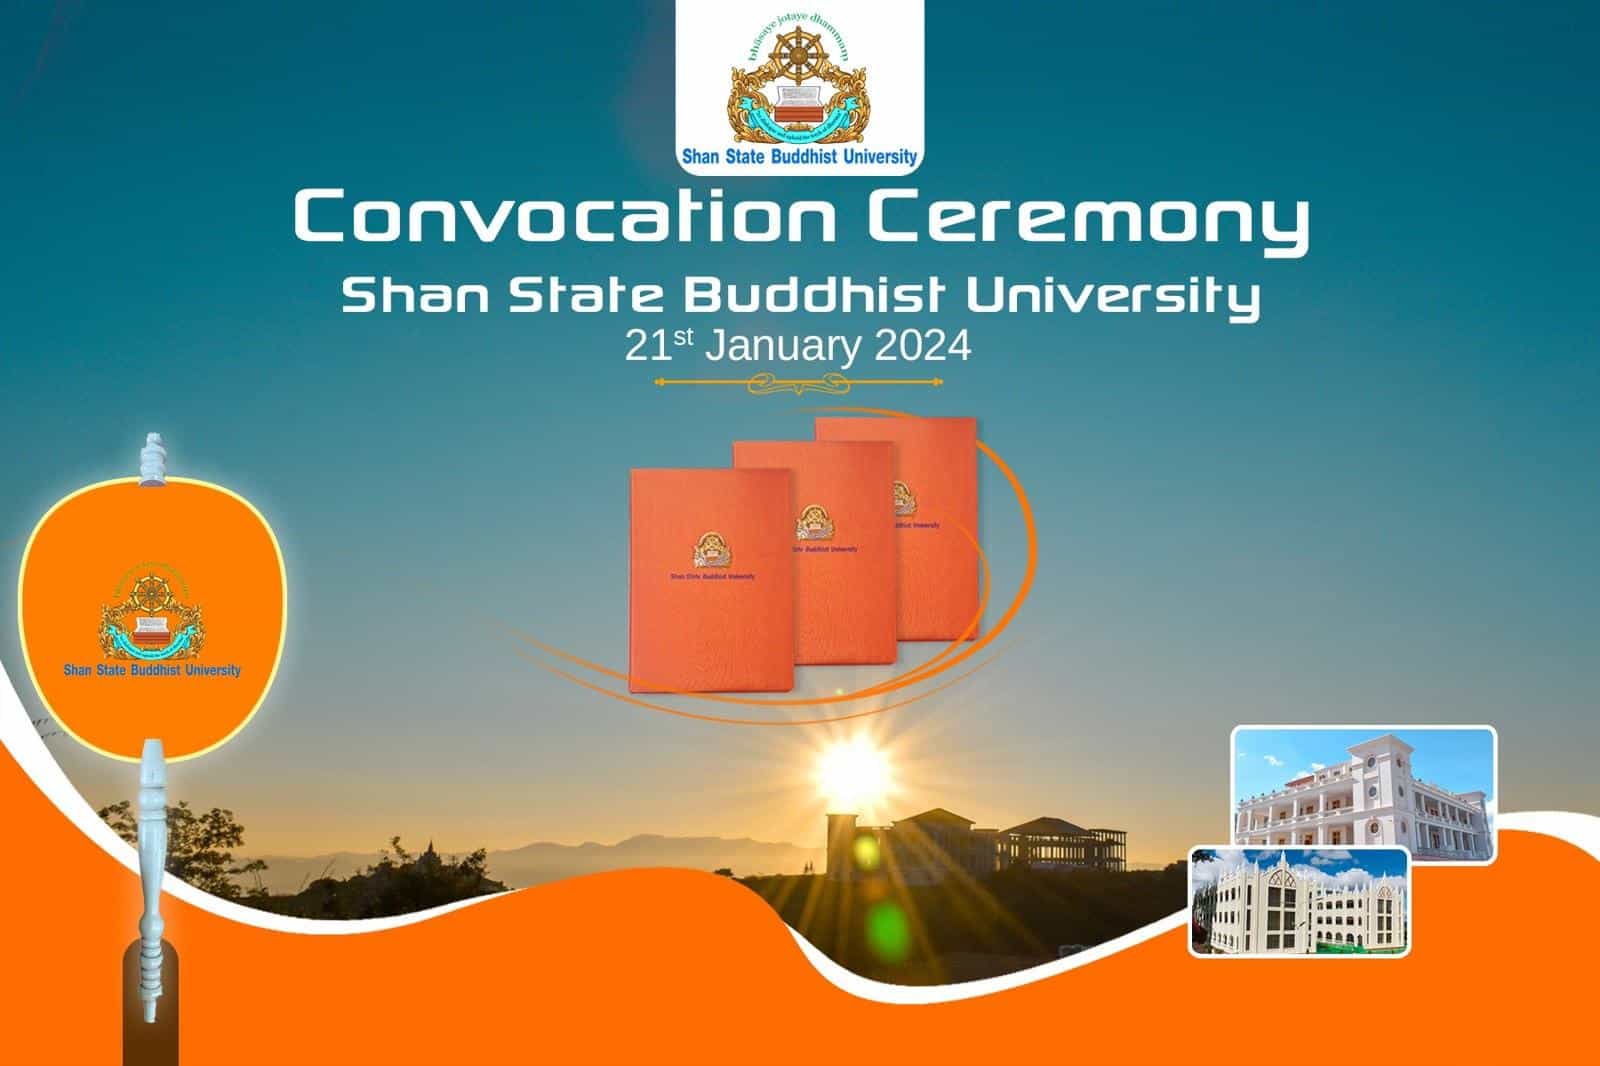 The 1st Convocation Ceremony